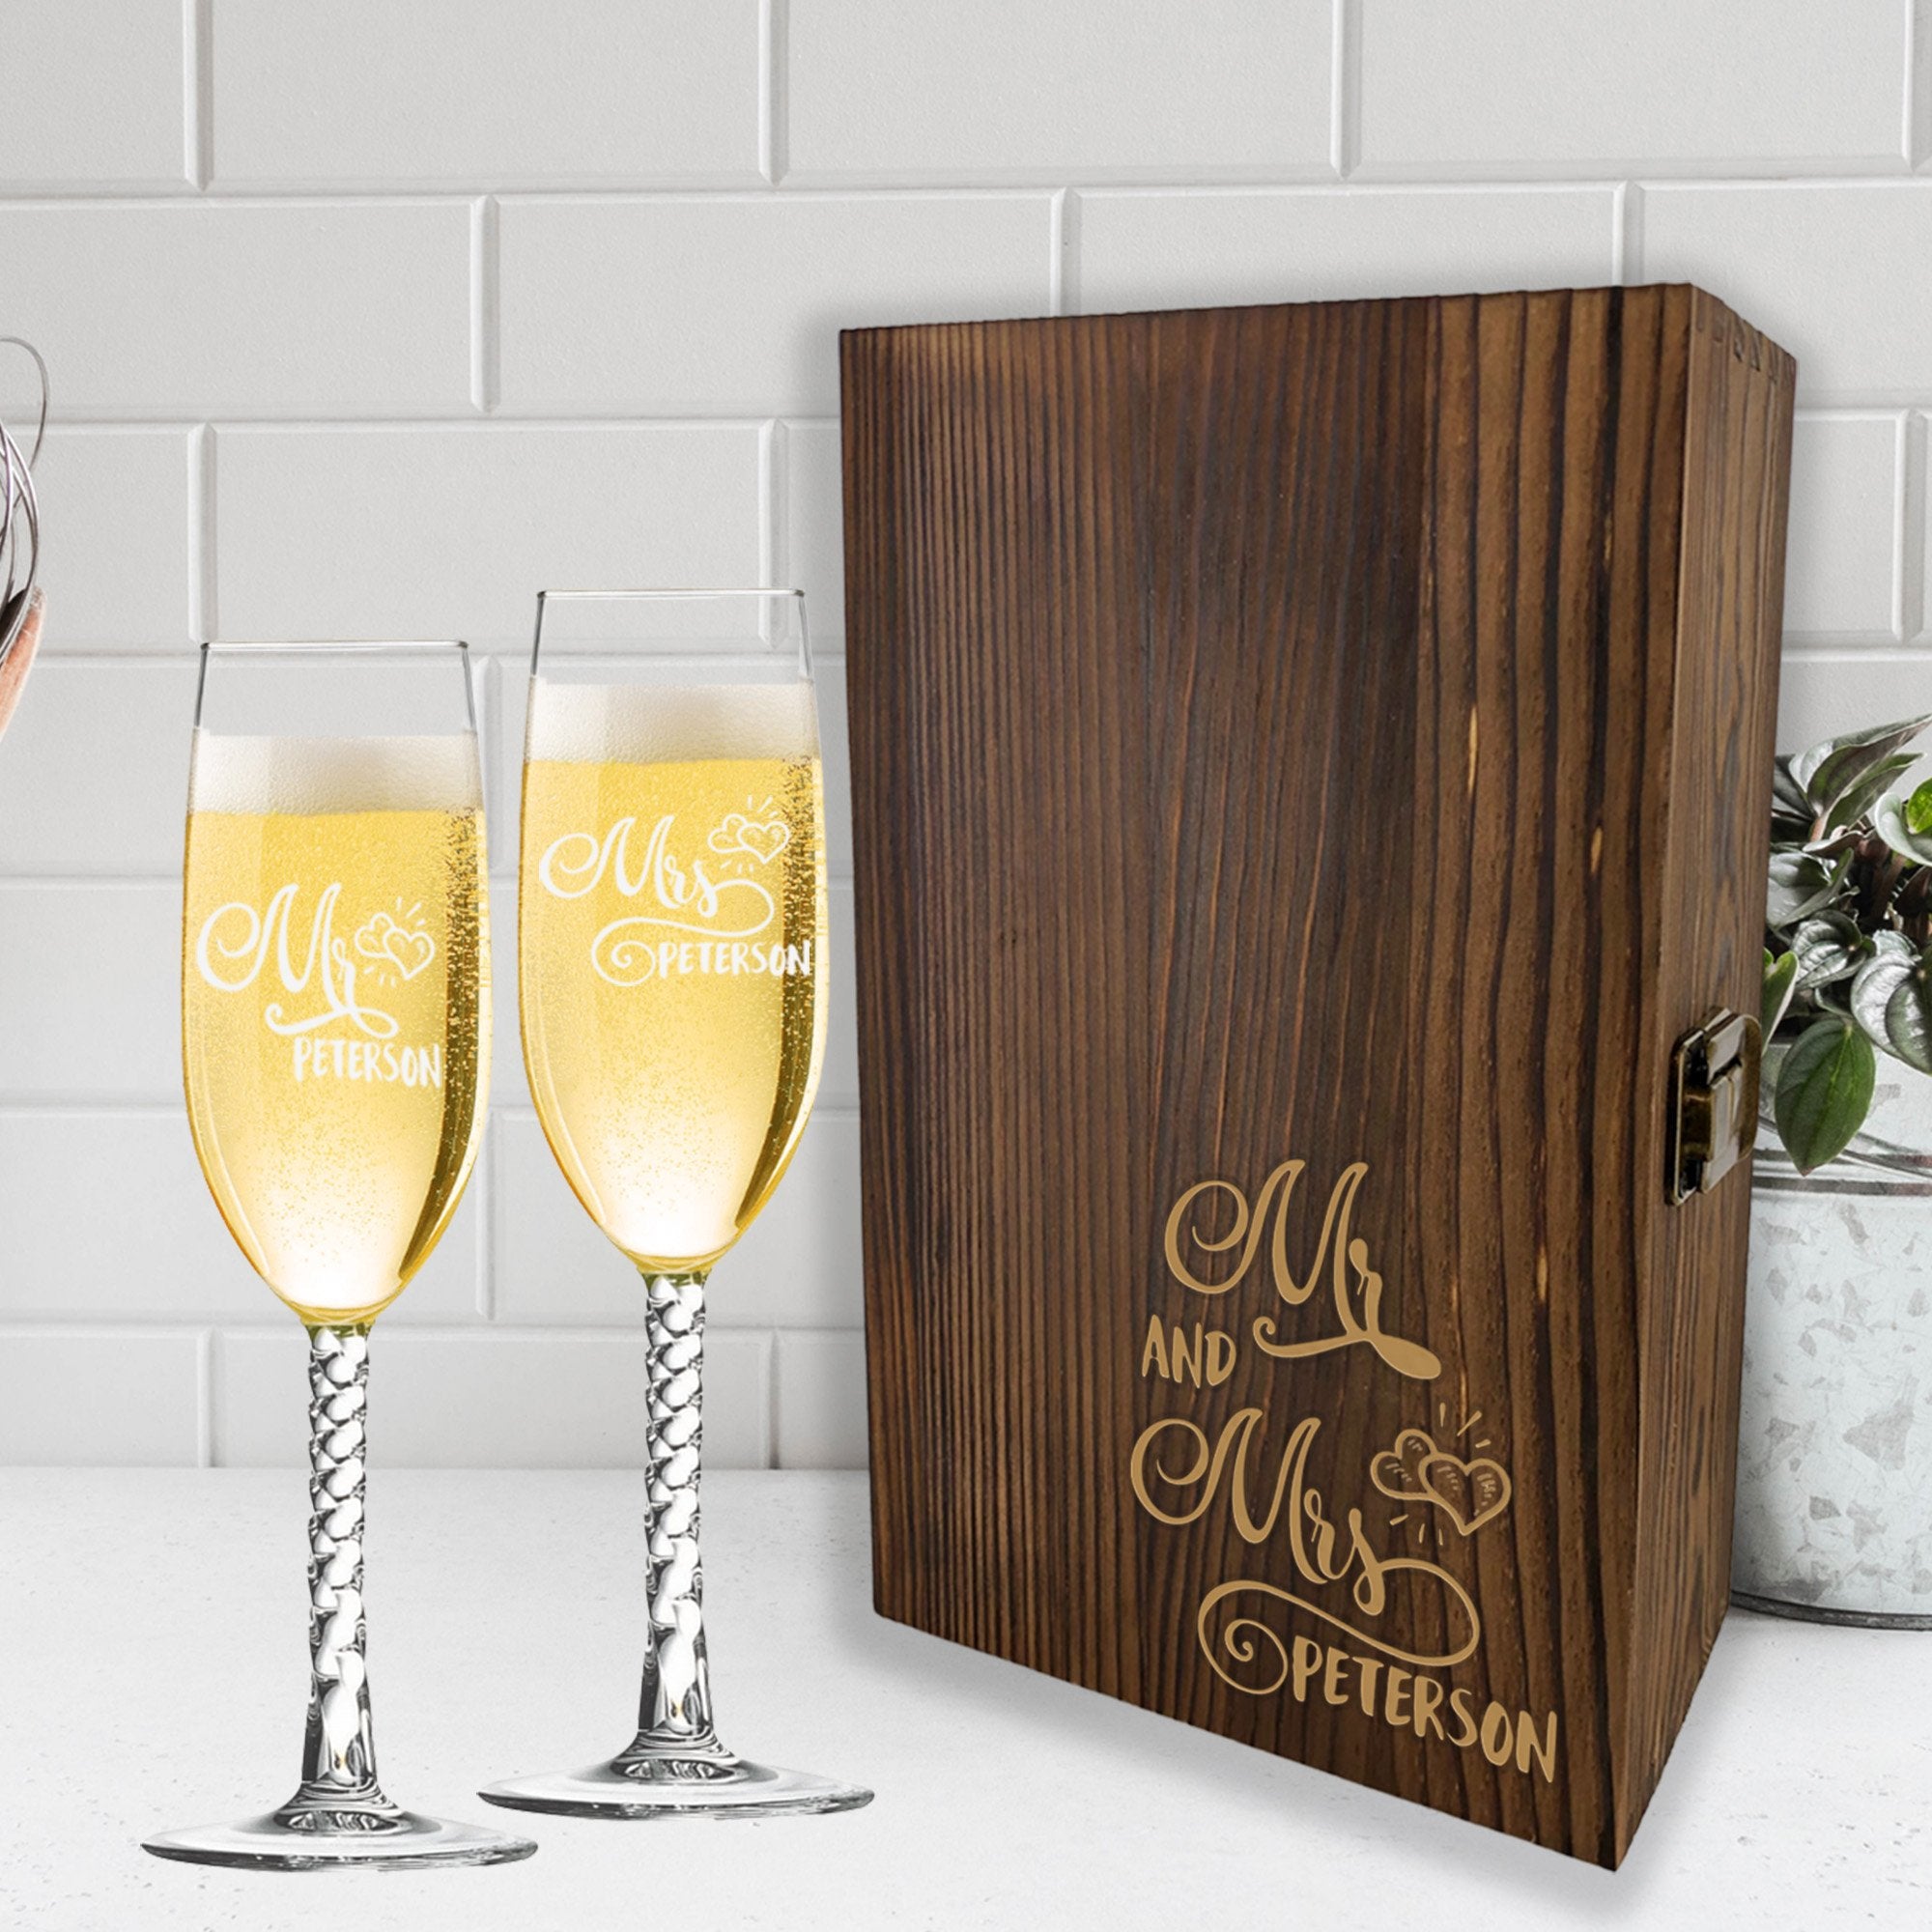 Engraved Personalized Champagne Flute for Bridesmaid/Wedding Party by Sunny  Box